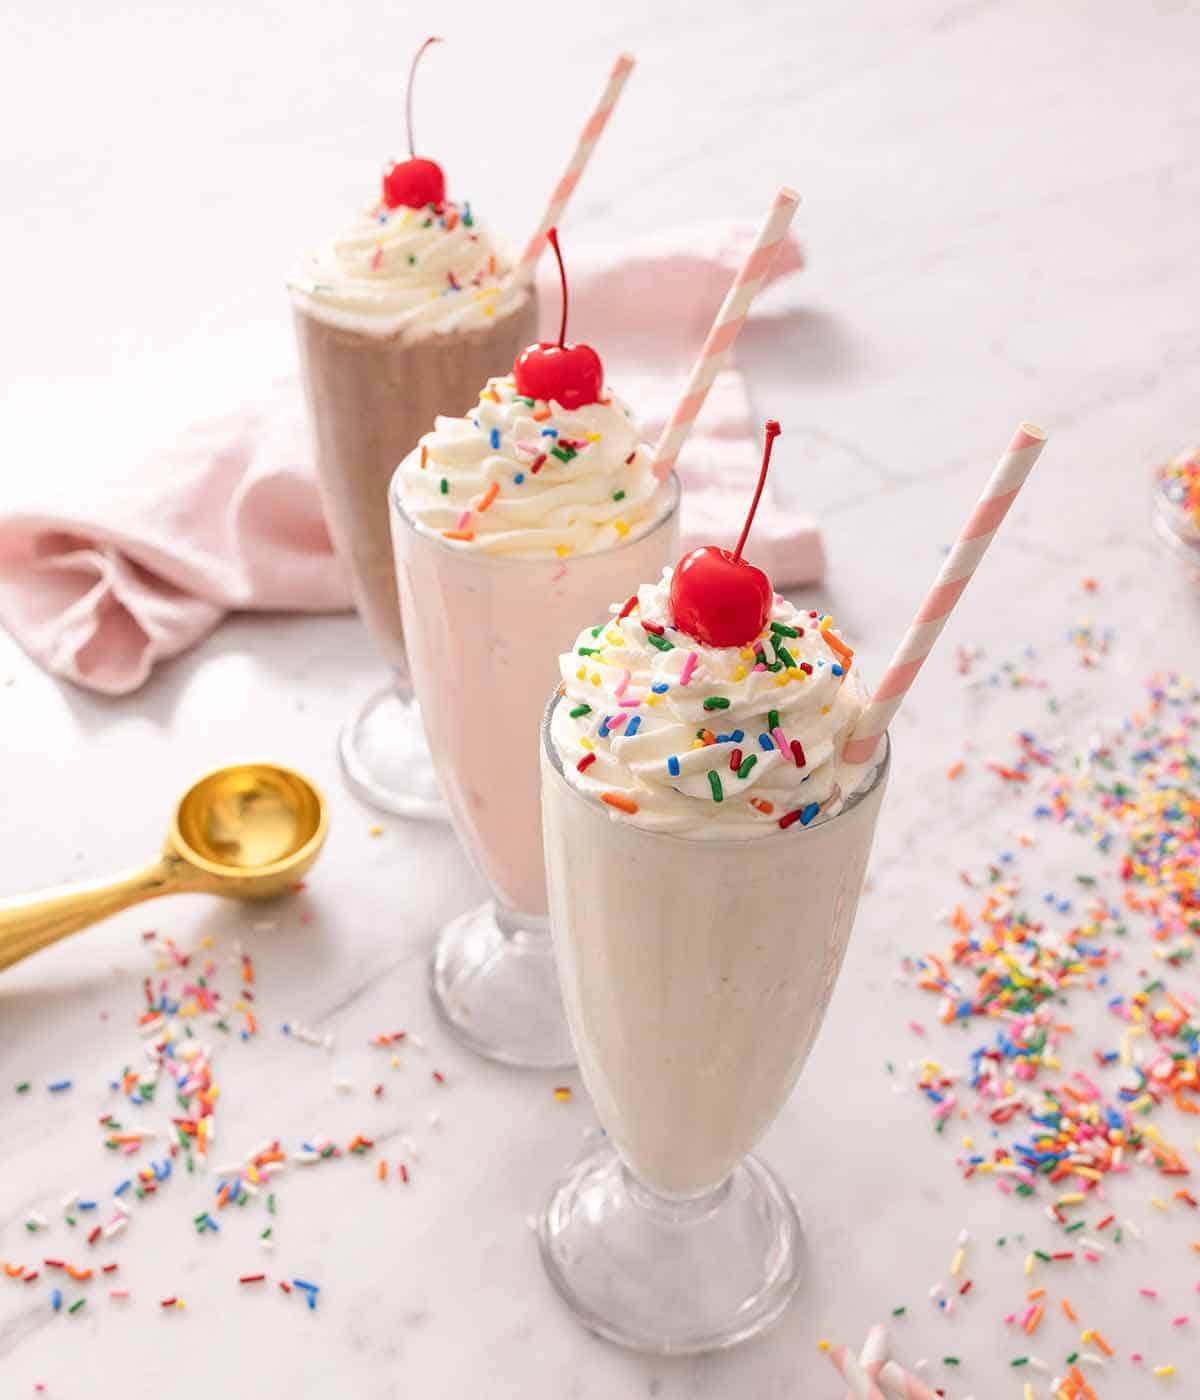 Three milkshakes: vanilla, strawberry, and chocolate flavored, all three with whipped cream, sprinkles, and a cherry on top.